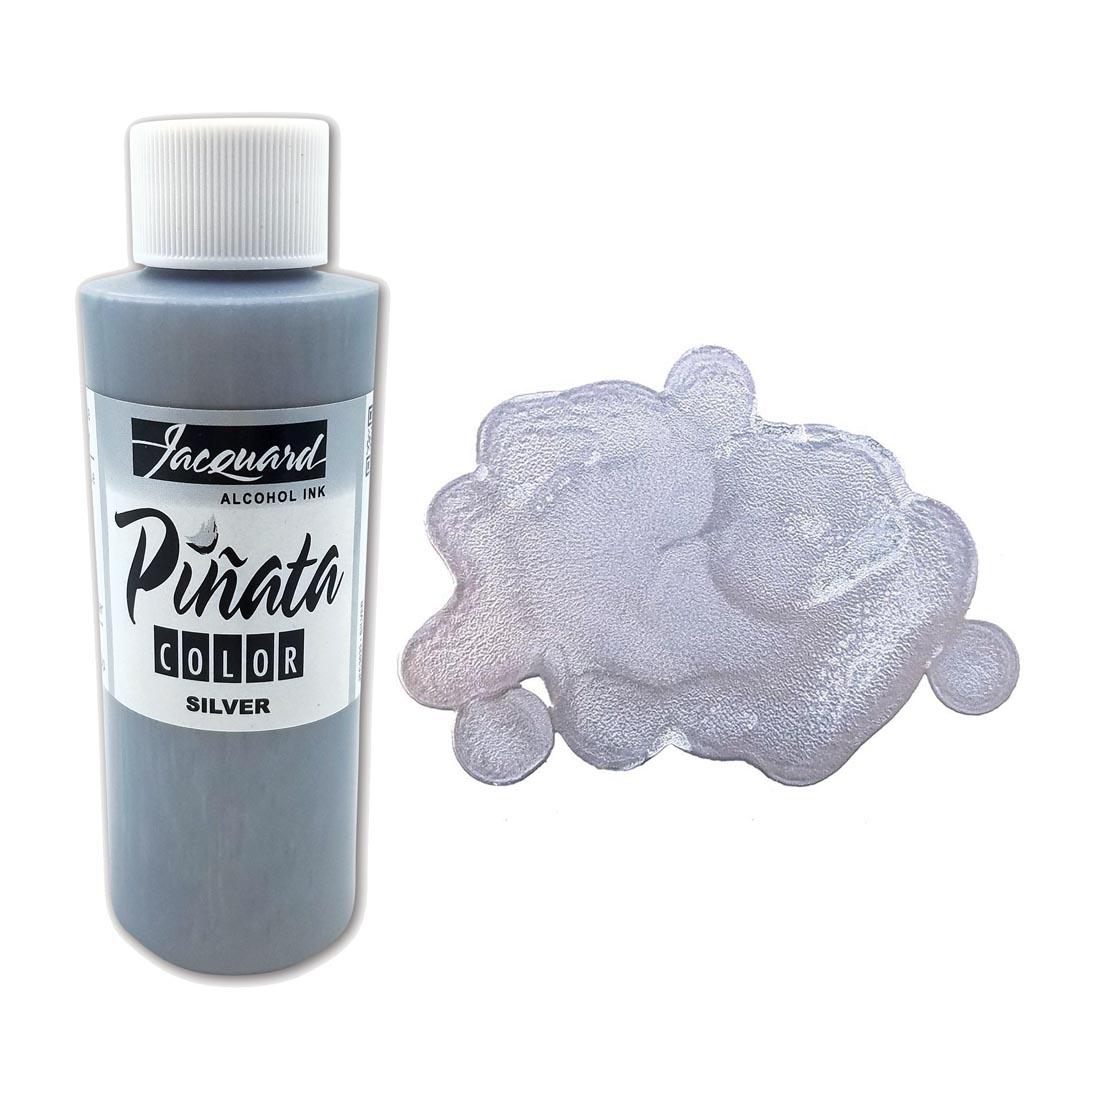 Bottle of Silver Jacquard Pinata Color Alcohol Ink beside an example color swatch